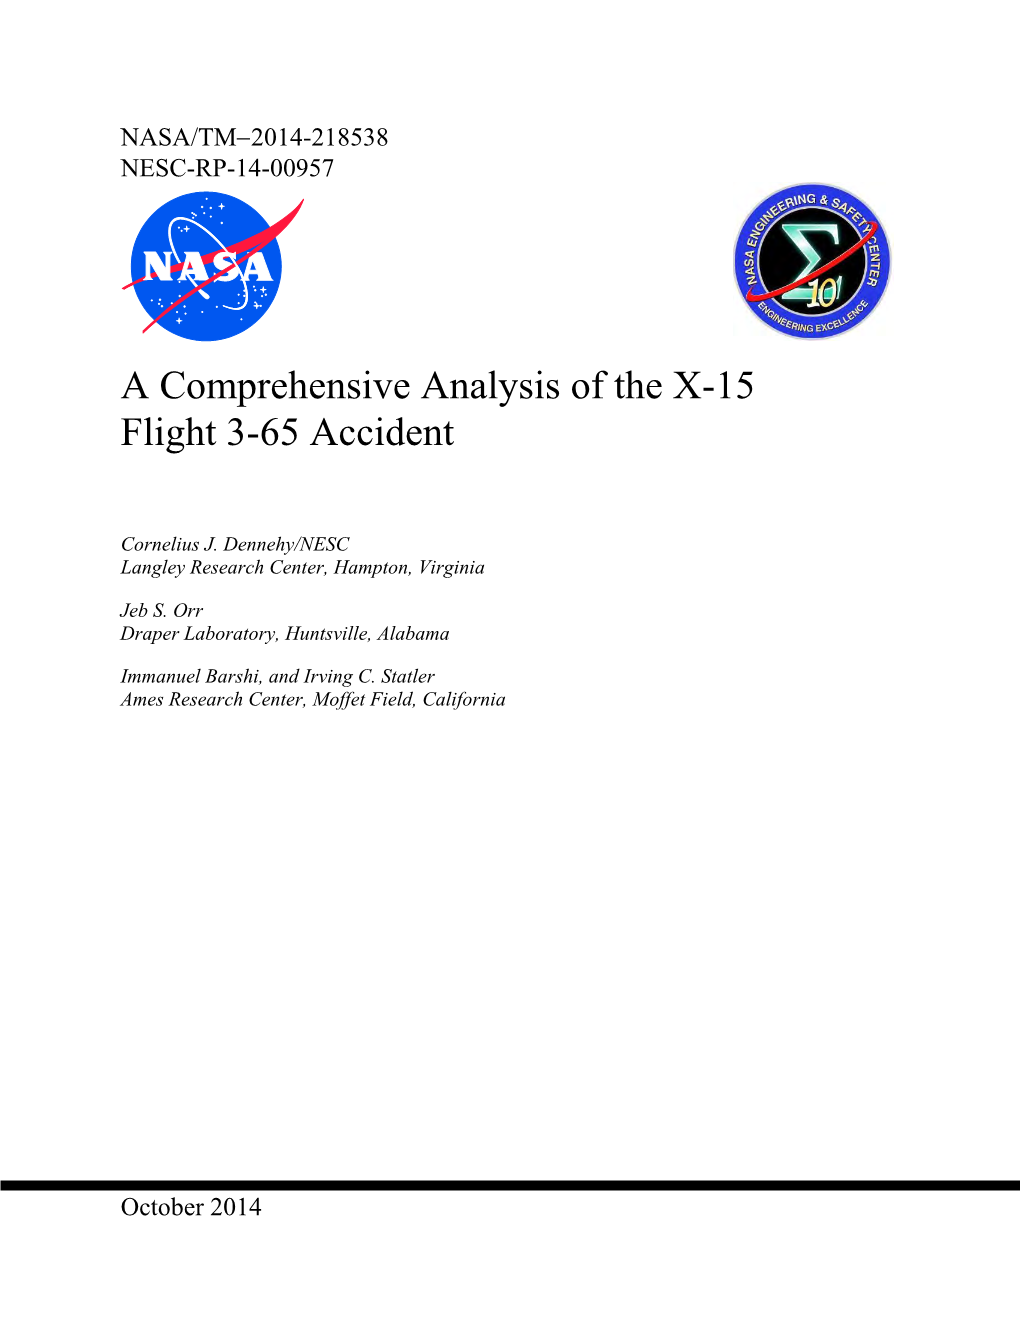 A Comprehensive Analysis of the X-15 Flight 3-65 Accident